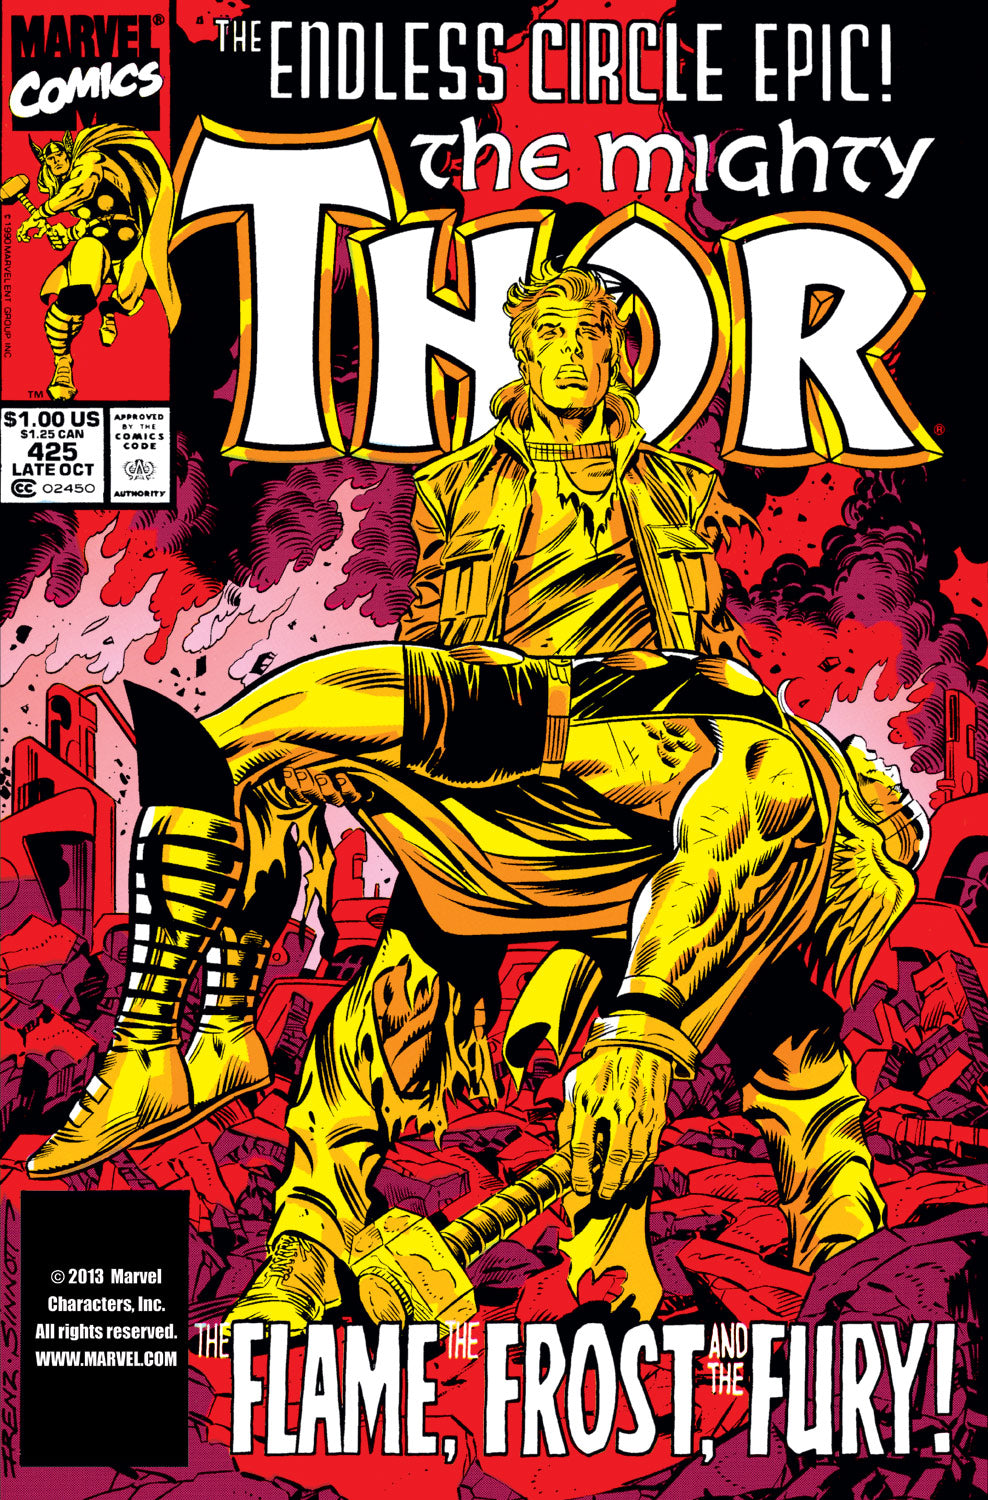 (The Mighty )Thor issue #425 1990